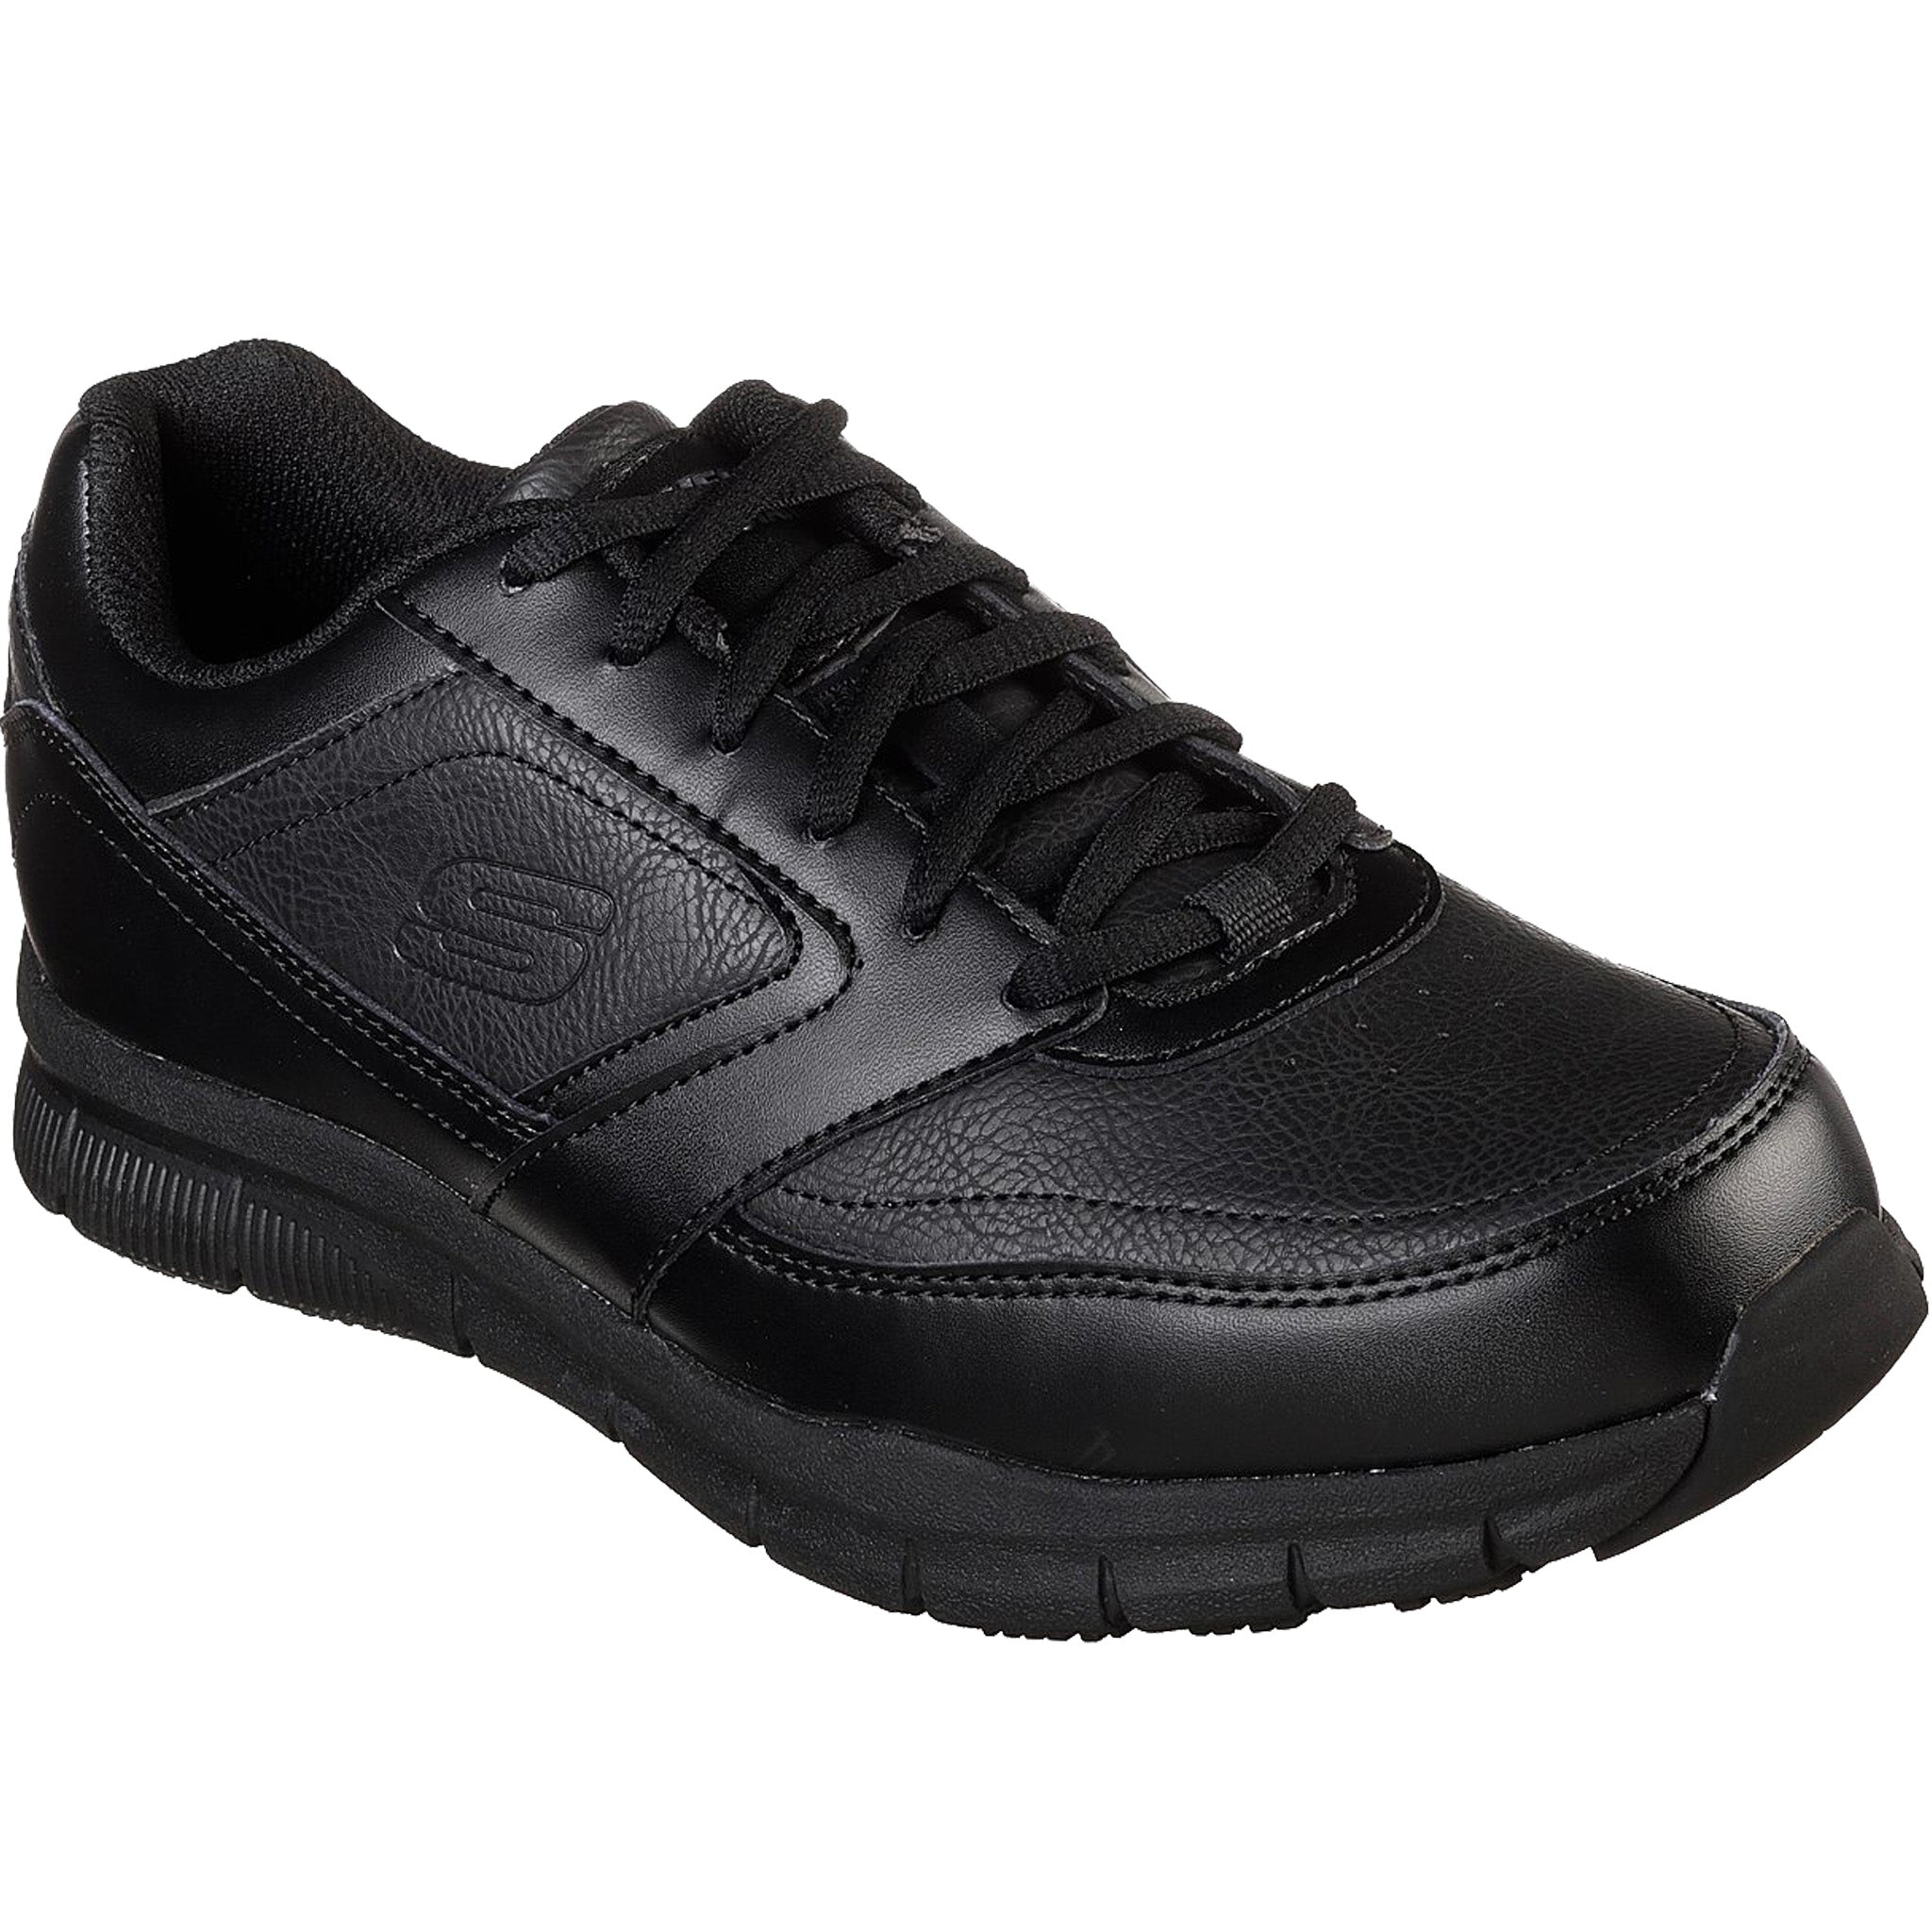 Skechers Men's Nampa Memory Foam Resistant Shoes – That Shoe Store and More